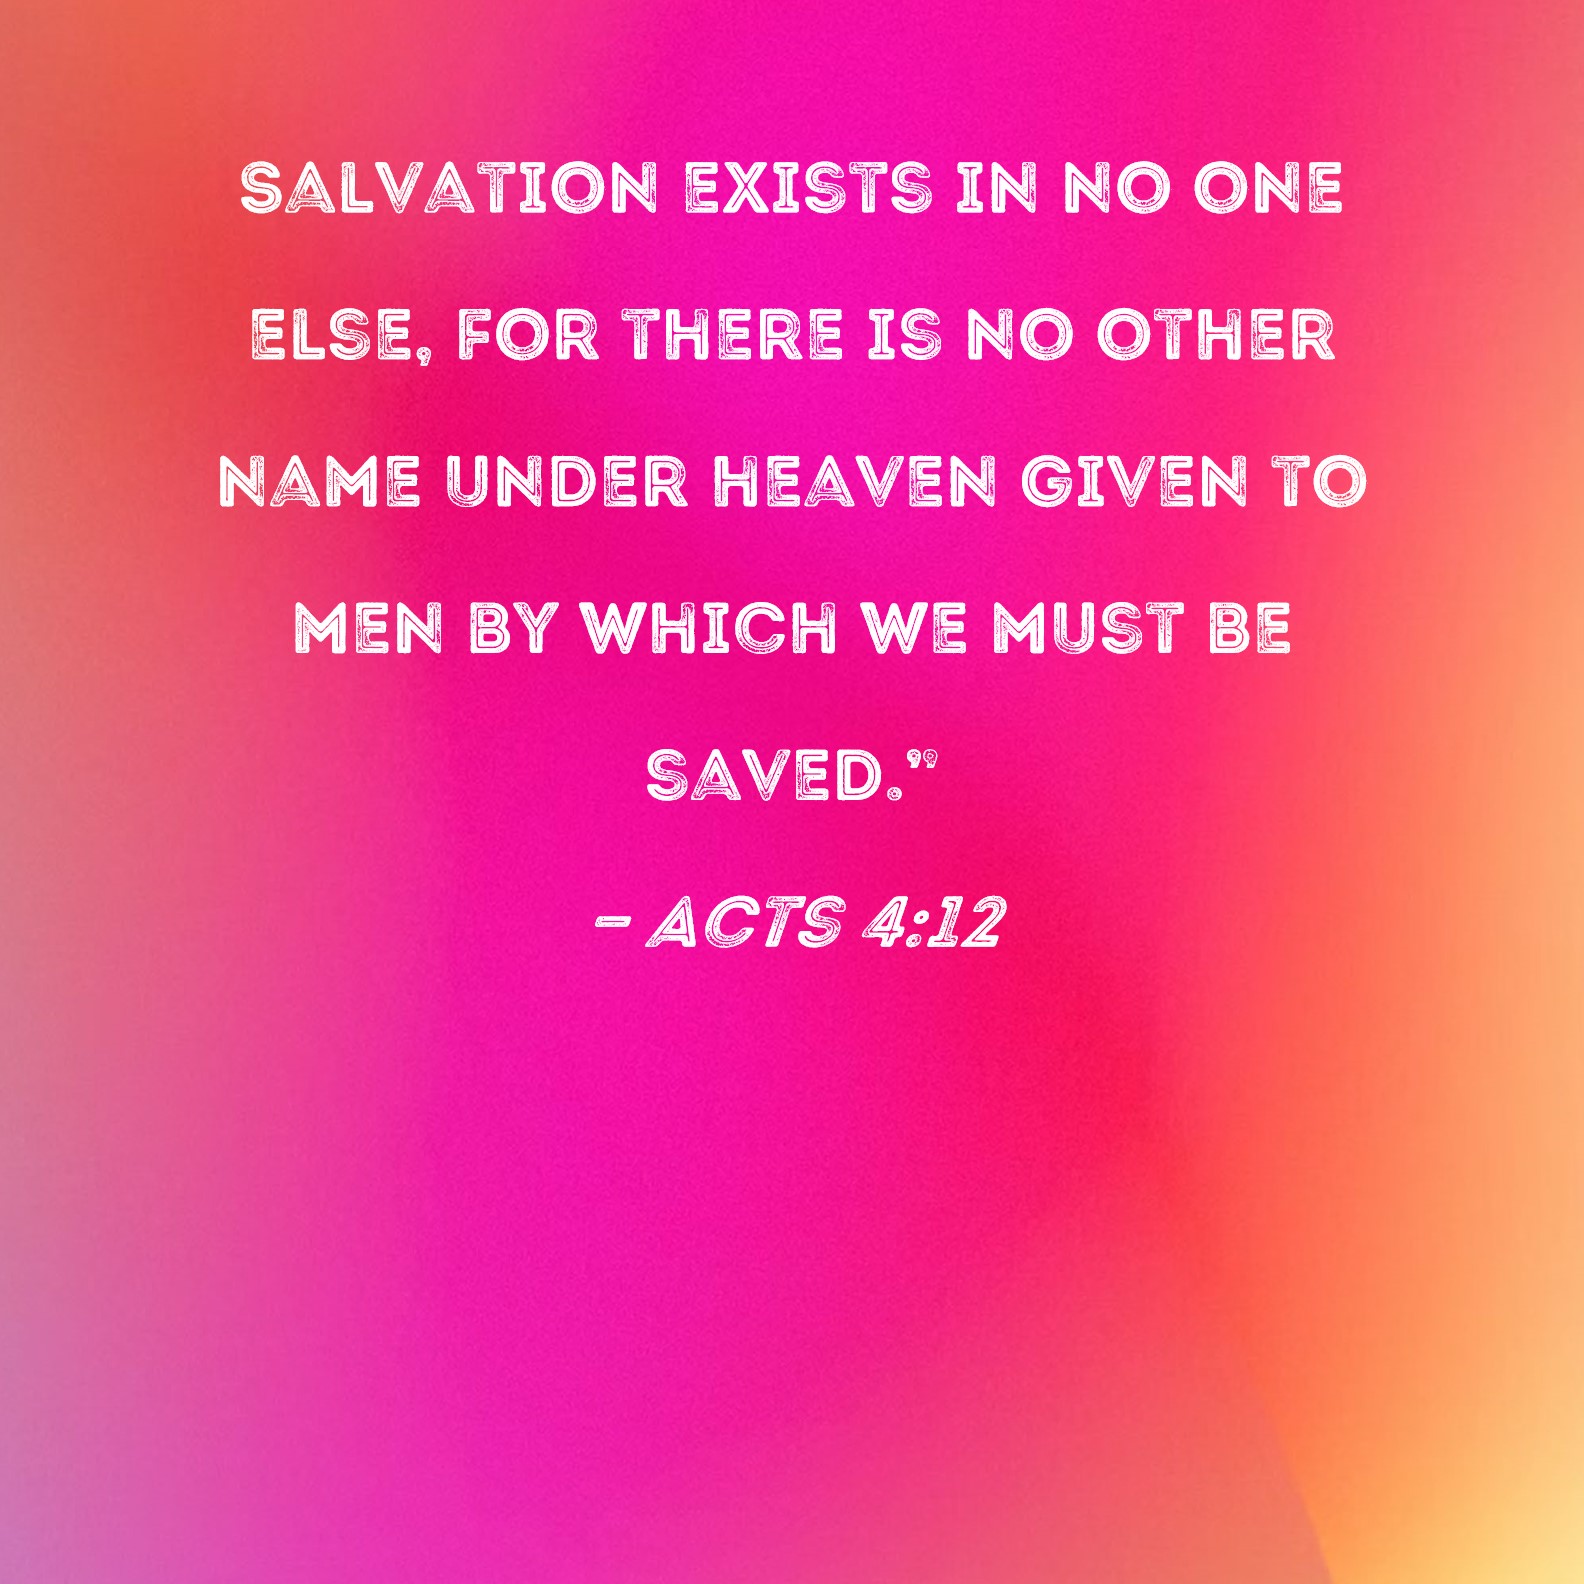 Acts 4 12 Salvation Exists In No One Else For There Is No Other Name Under Heaven Given To Men By Which We Must Be Saved